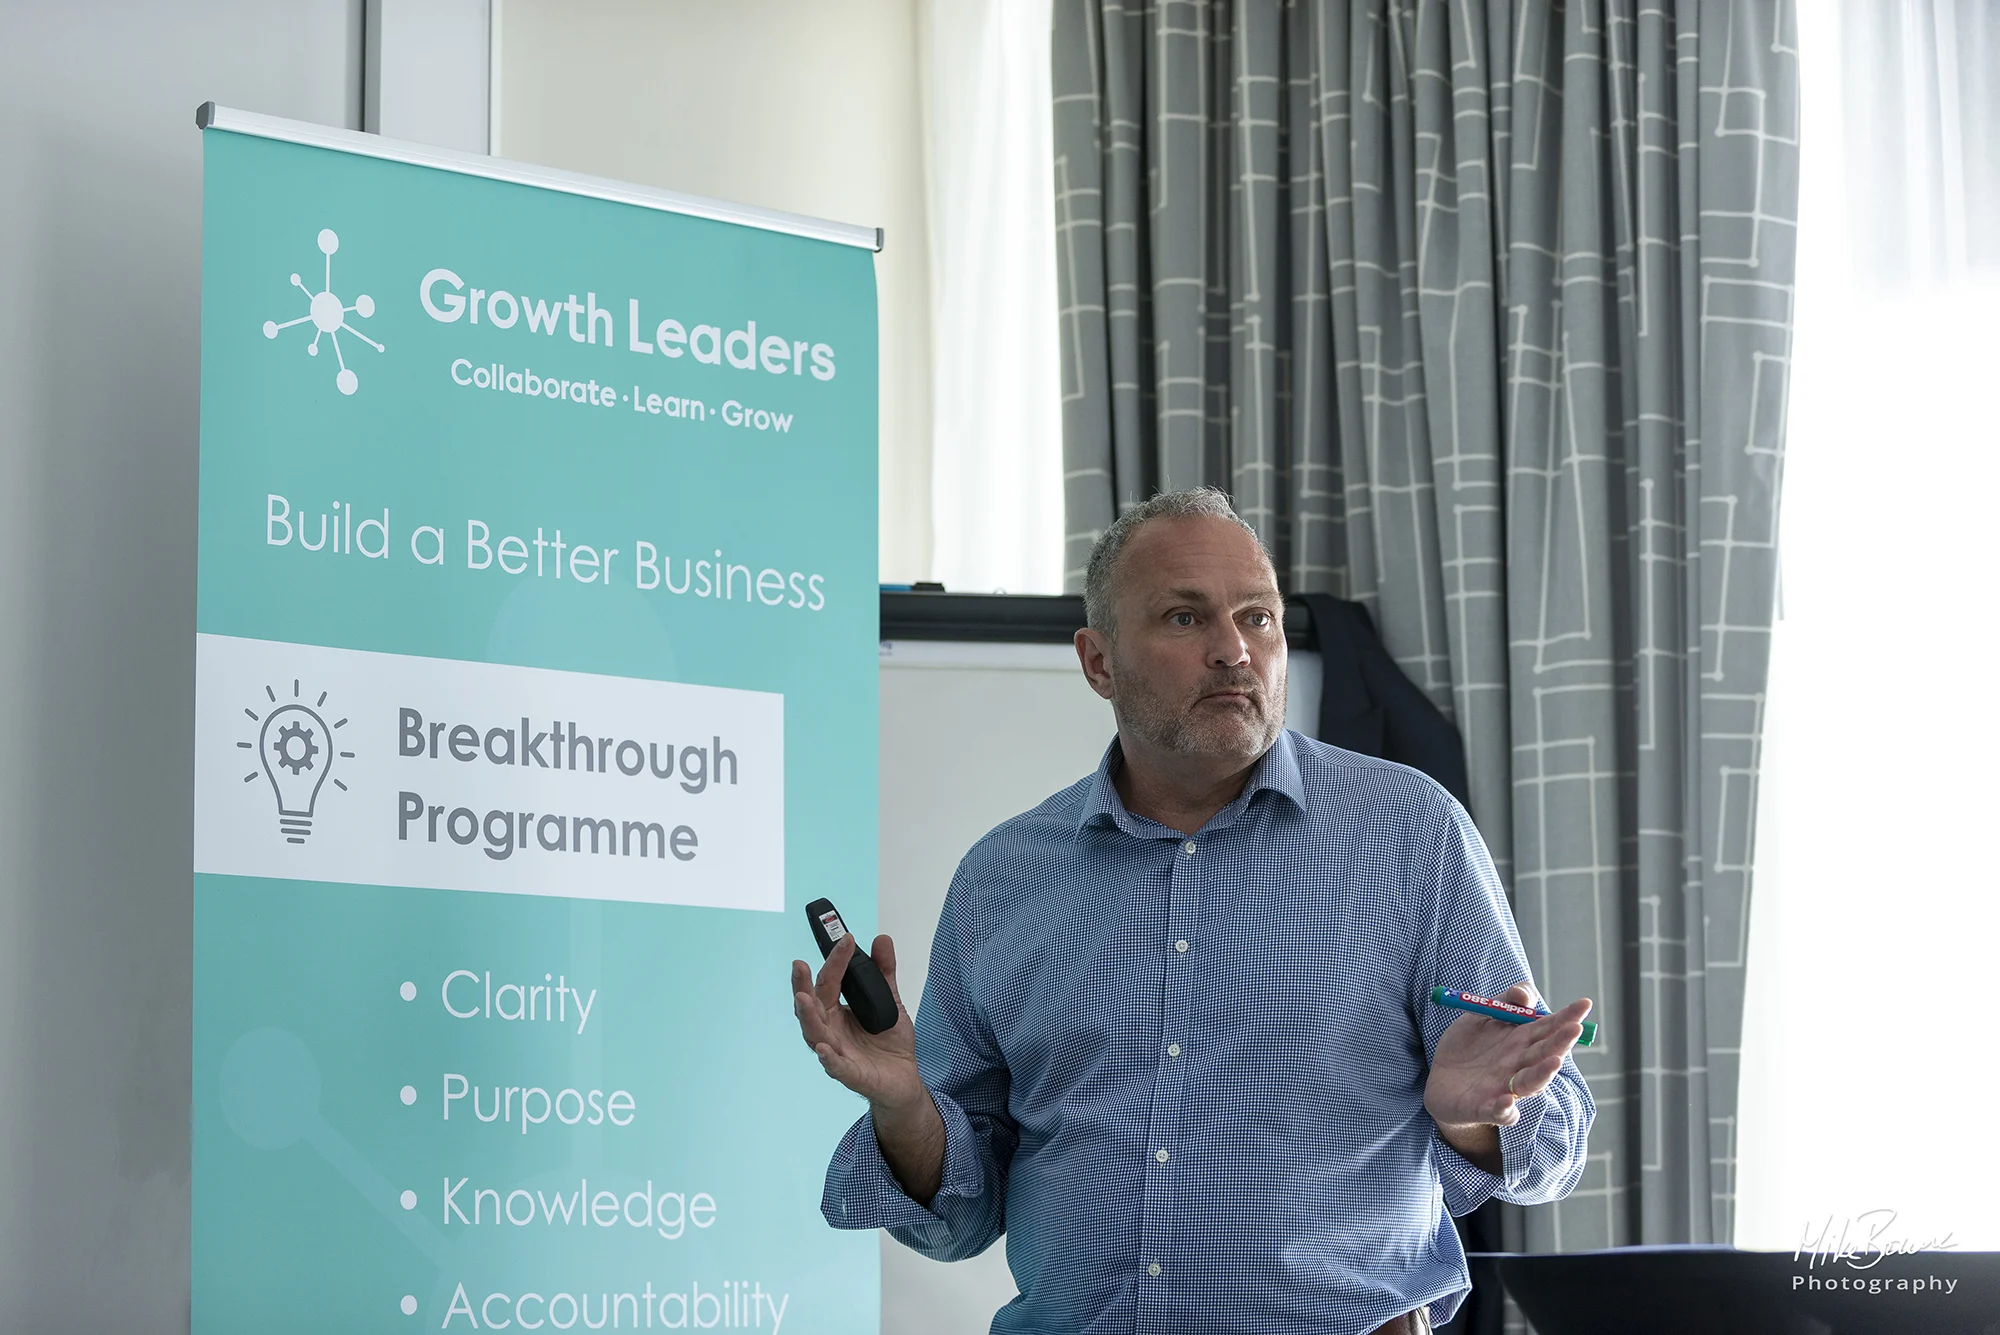 Man doing a business presentation in front of a turquoise and corporate Growth Leaders sign